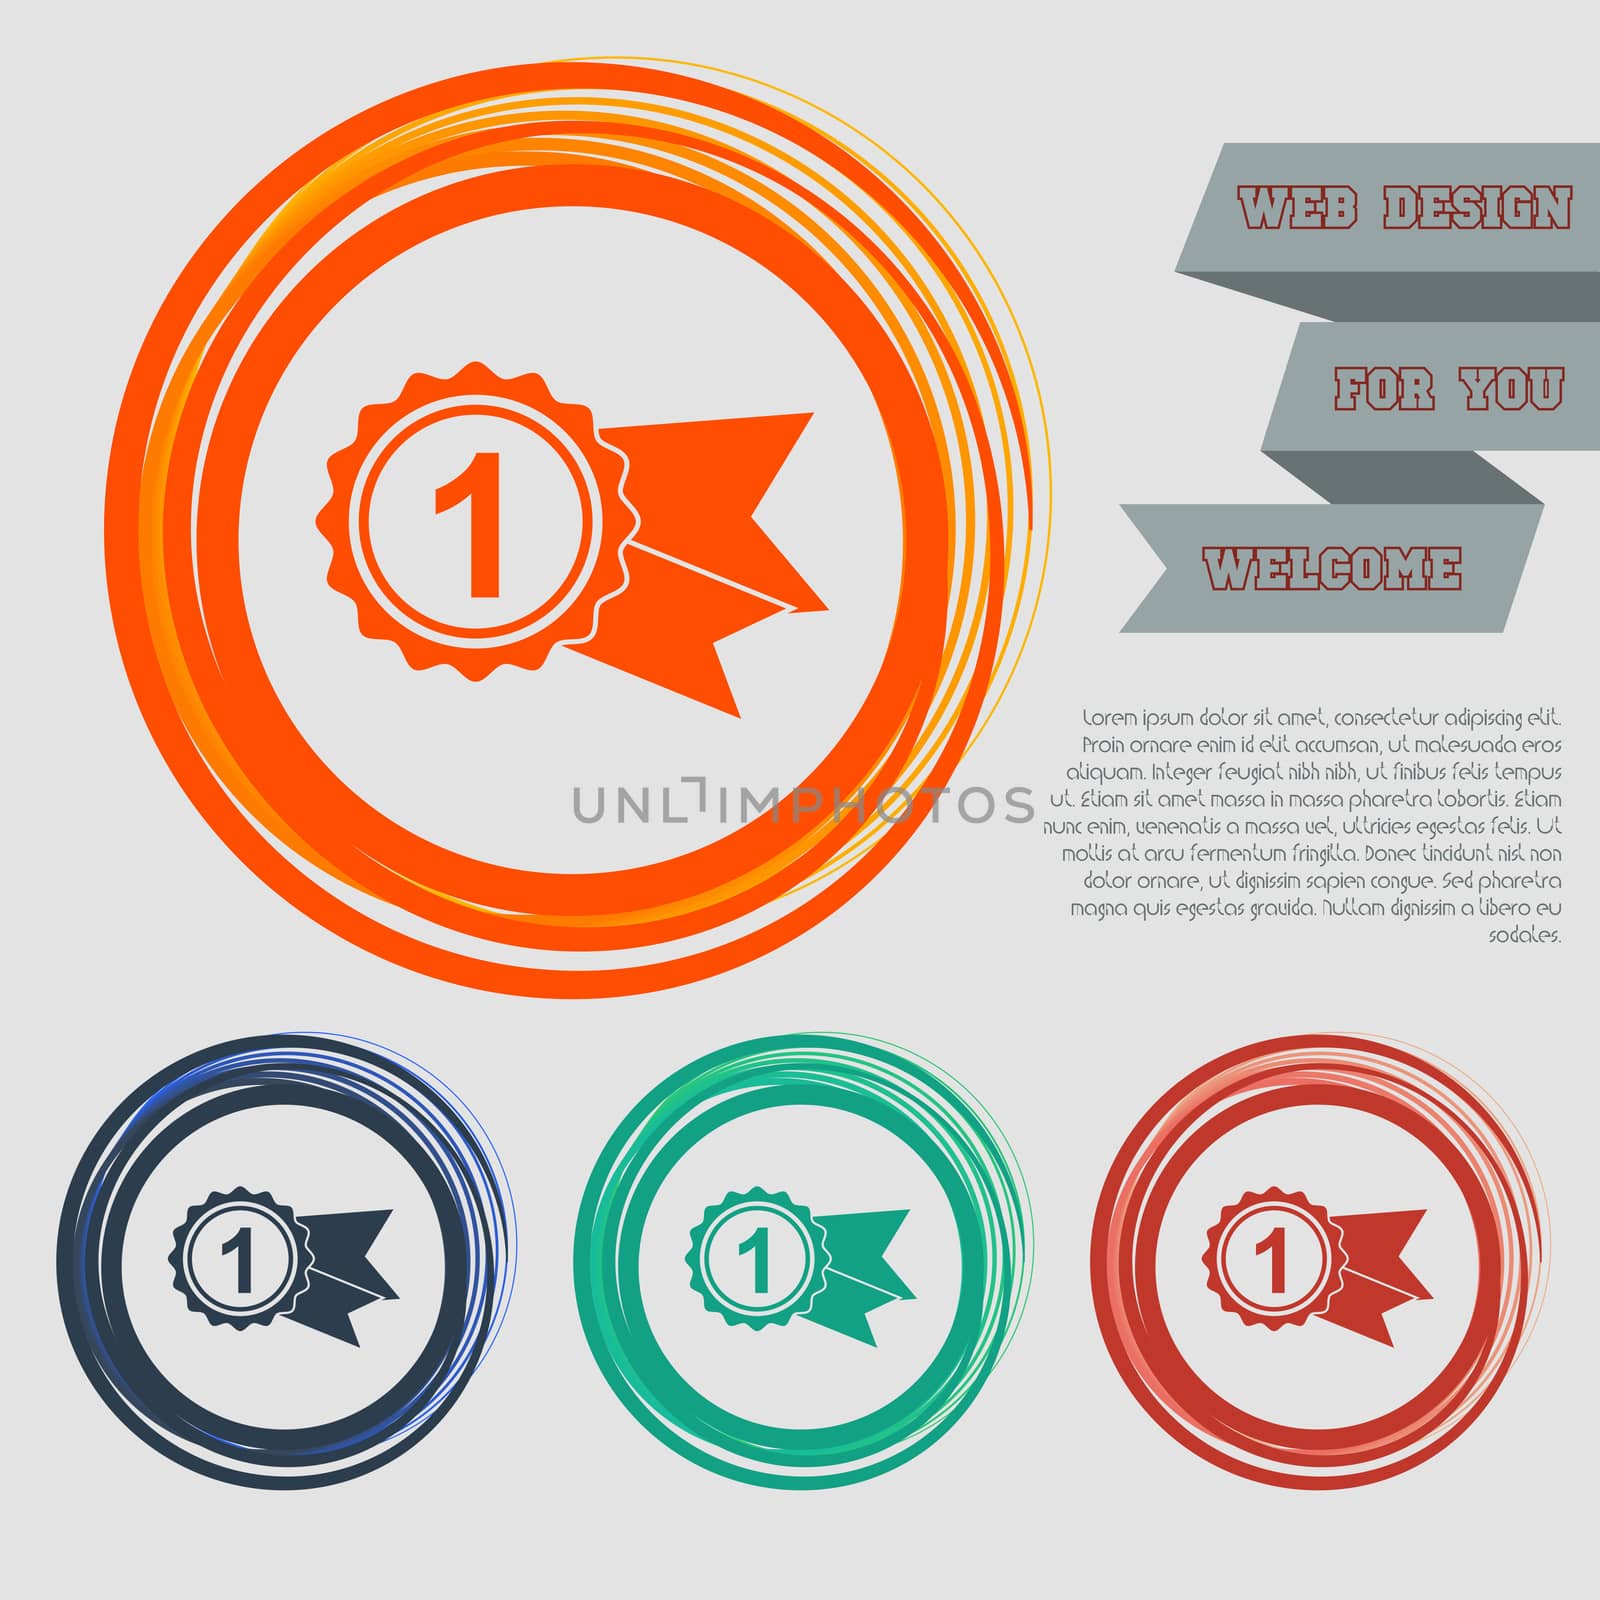 award, badge with ribbons icon on the red, blue, green, orange buttons for your website and design space text.  by Adamchuk